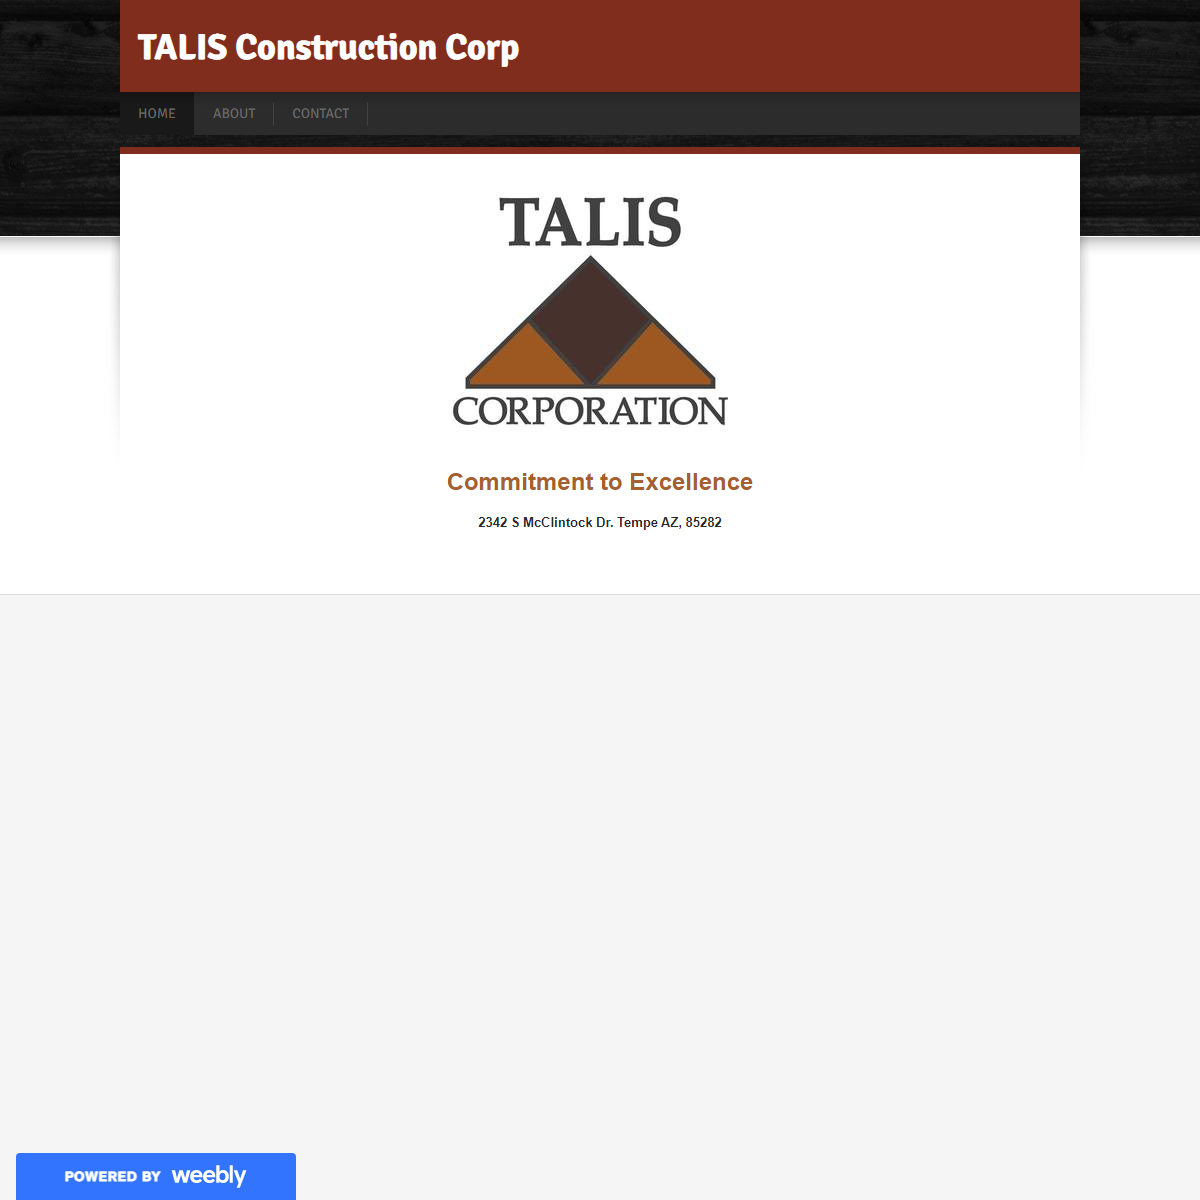 A complete backup of https://talisconstruction.weebly.com/